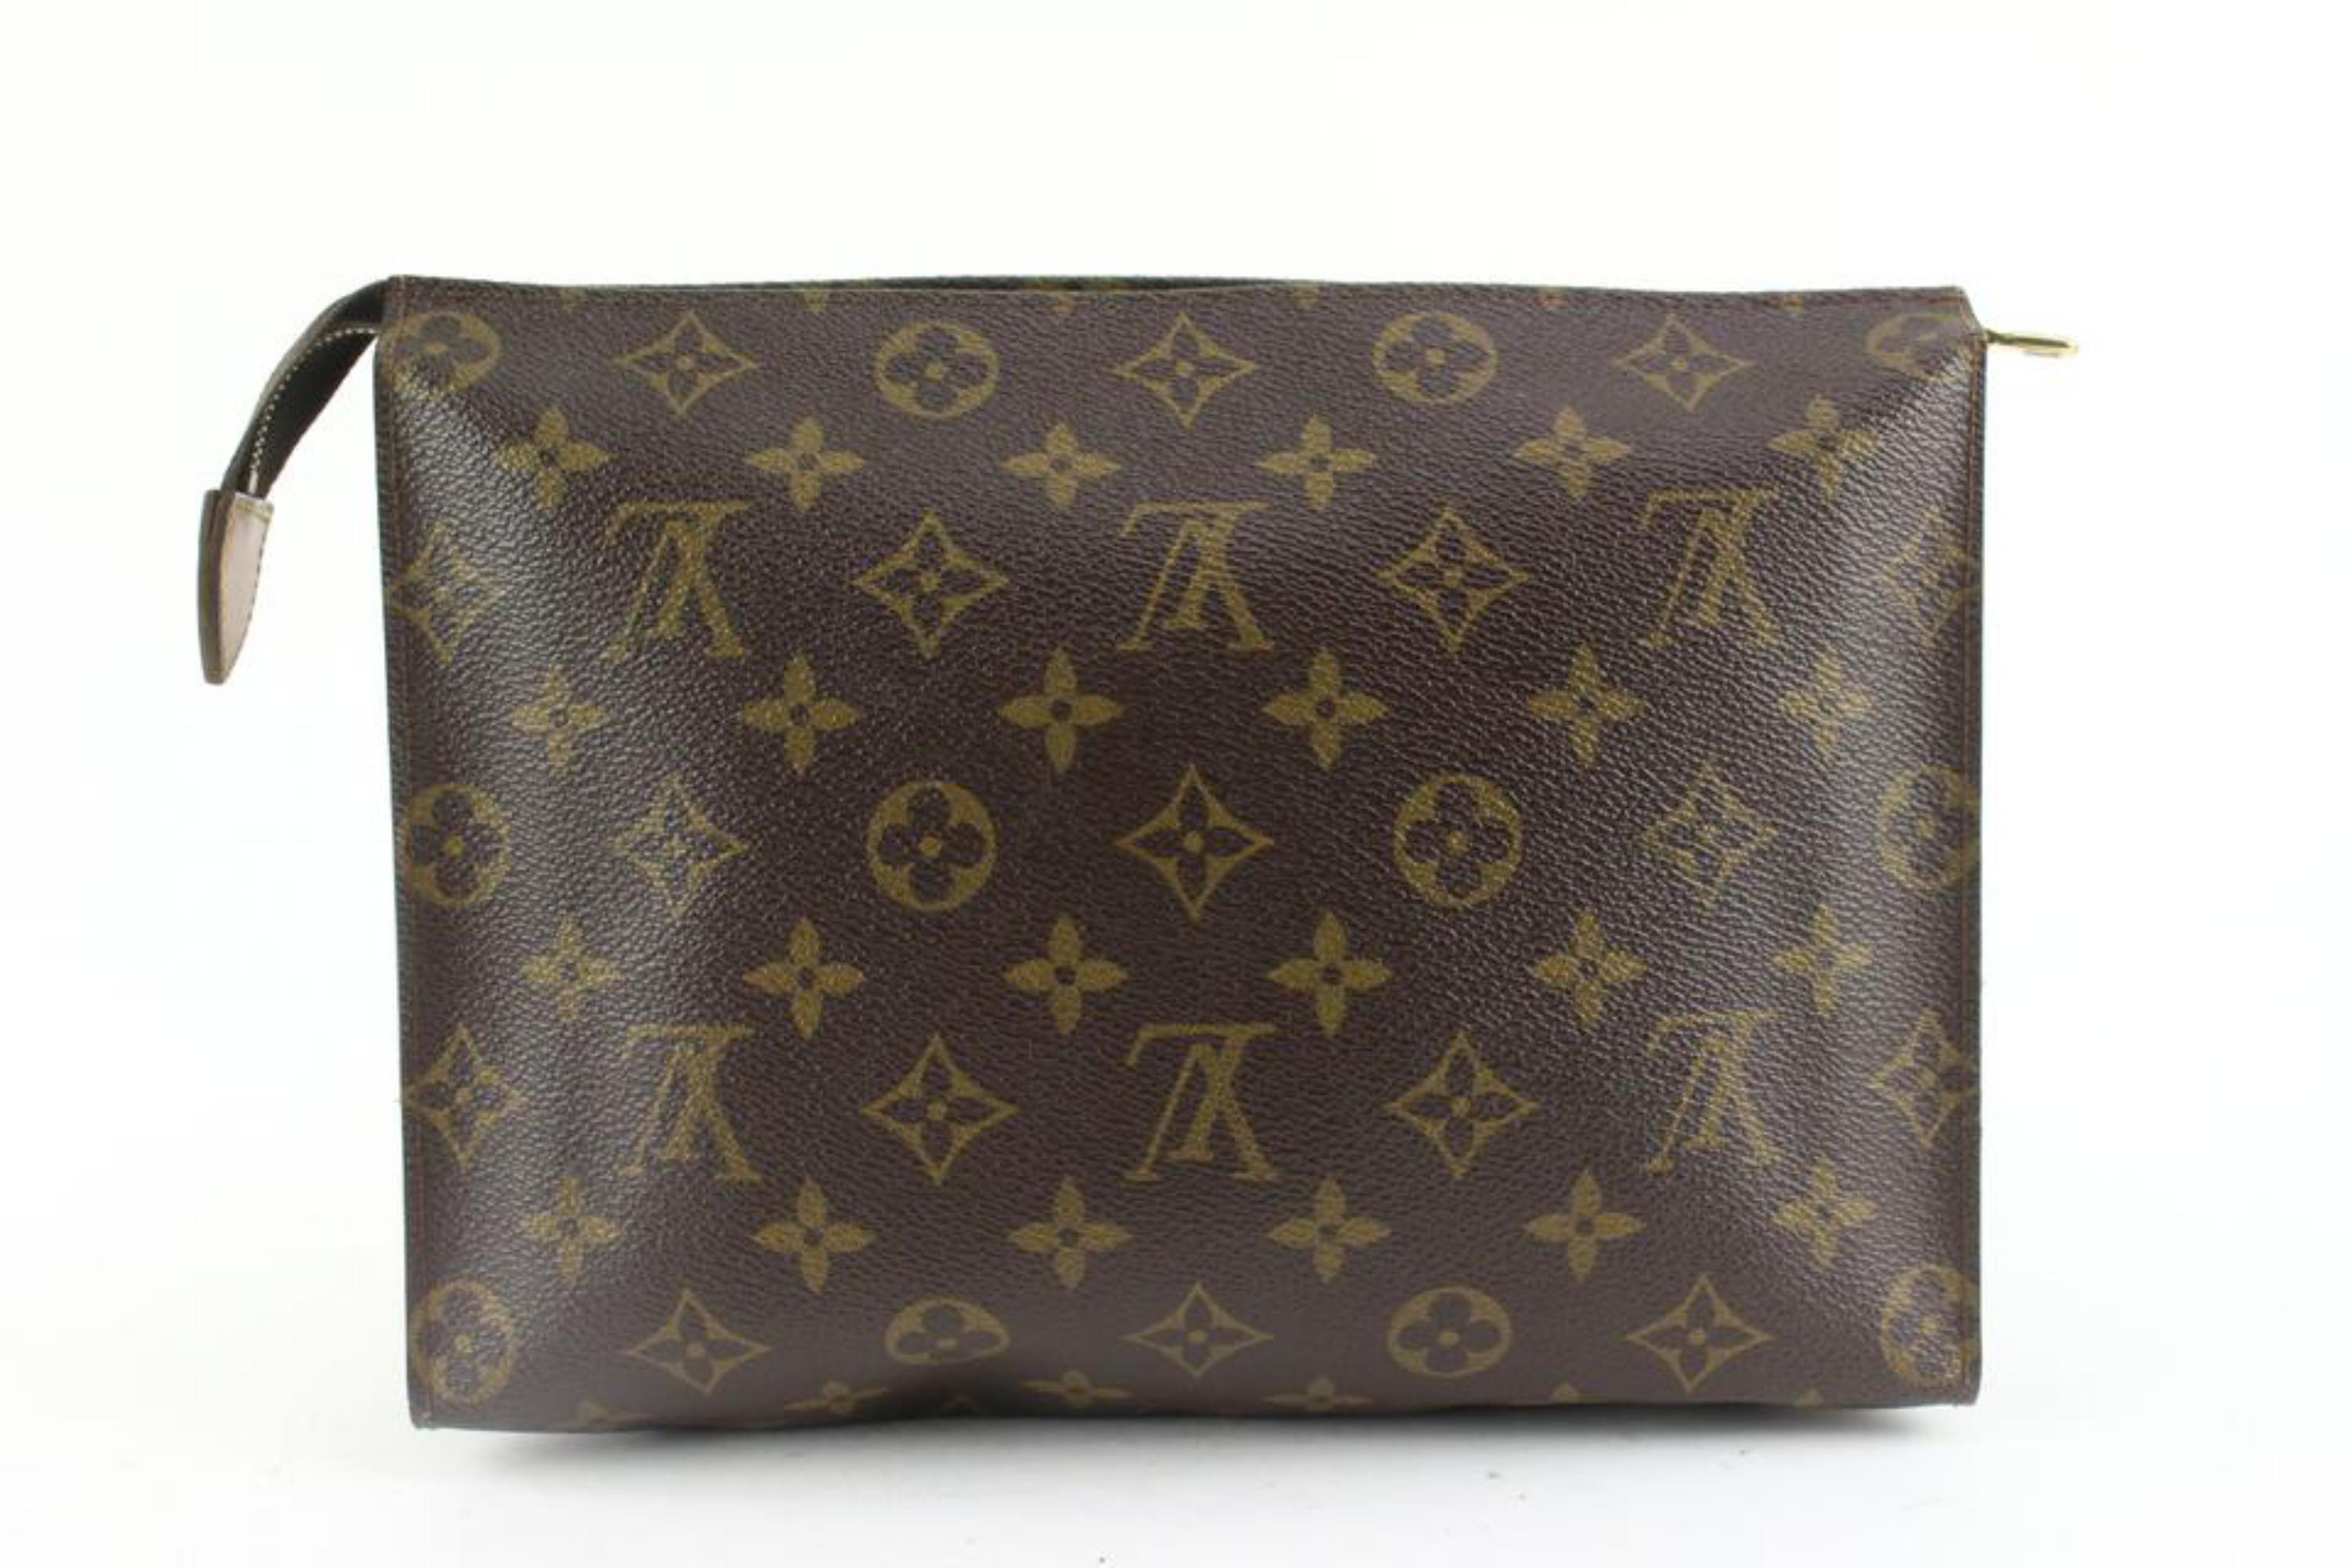 Black Louis Vuitton Discontinued Monogram Toiletry Pouch 26 Cosmetic Case 1224lv40 For Sale